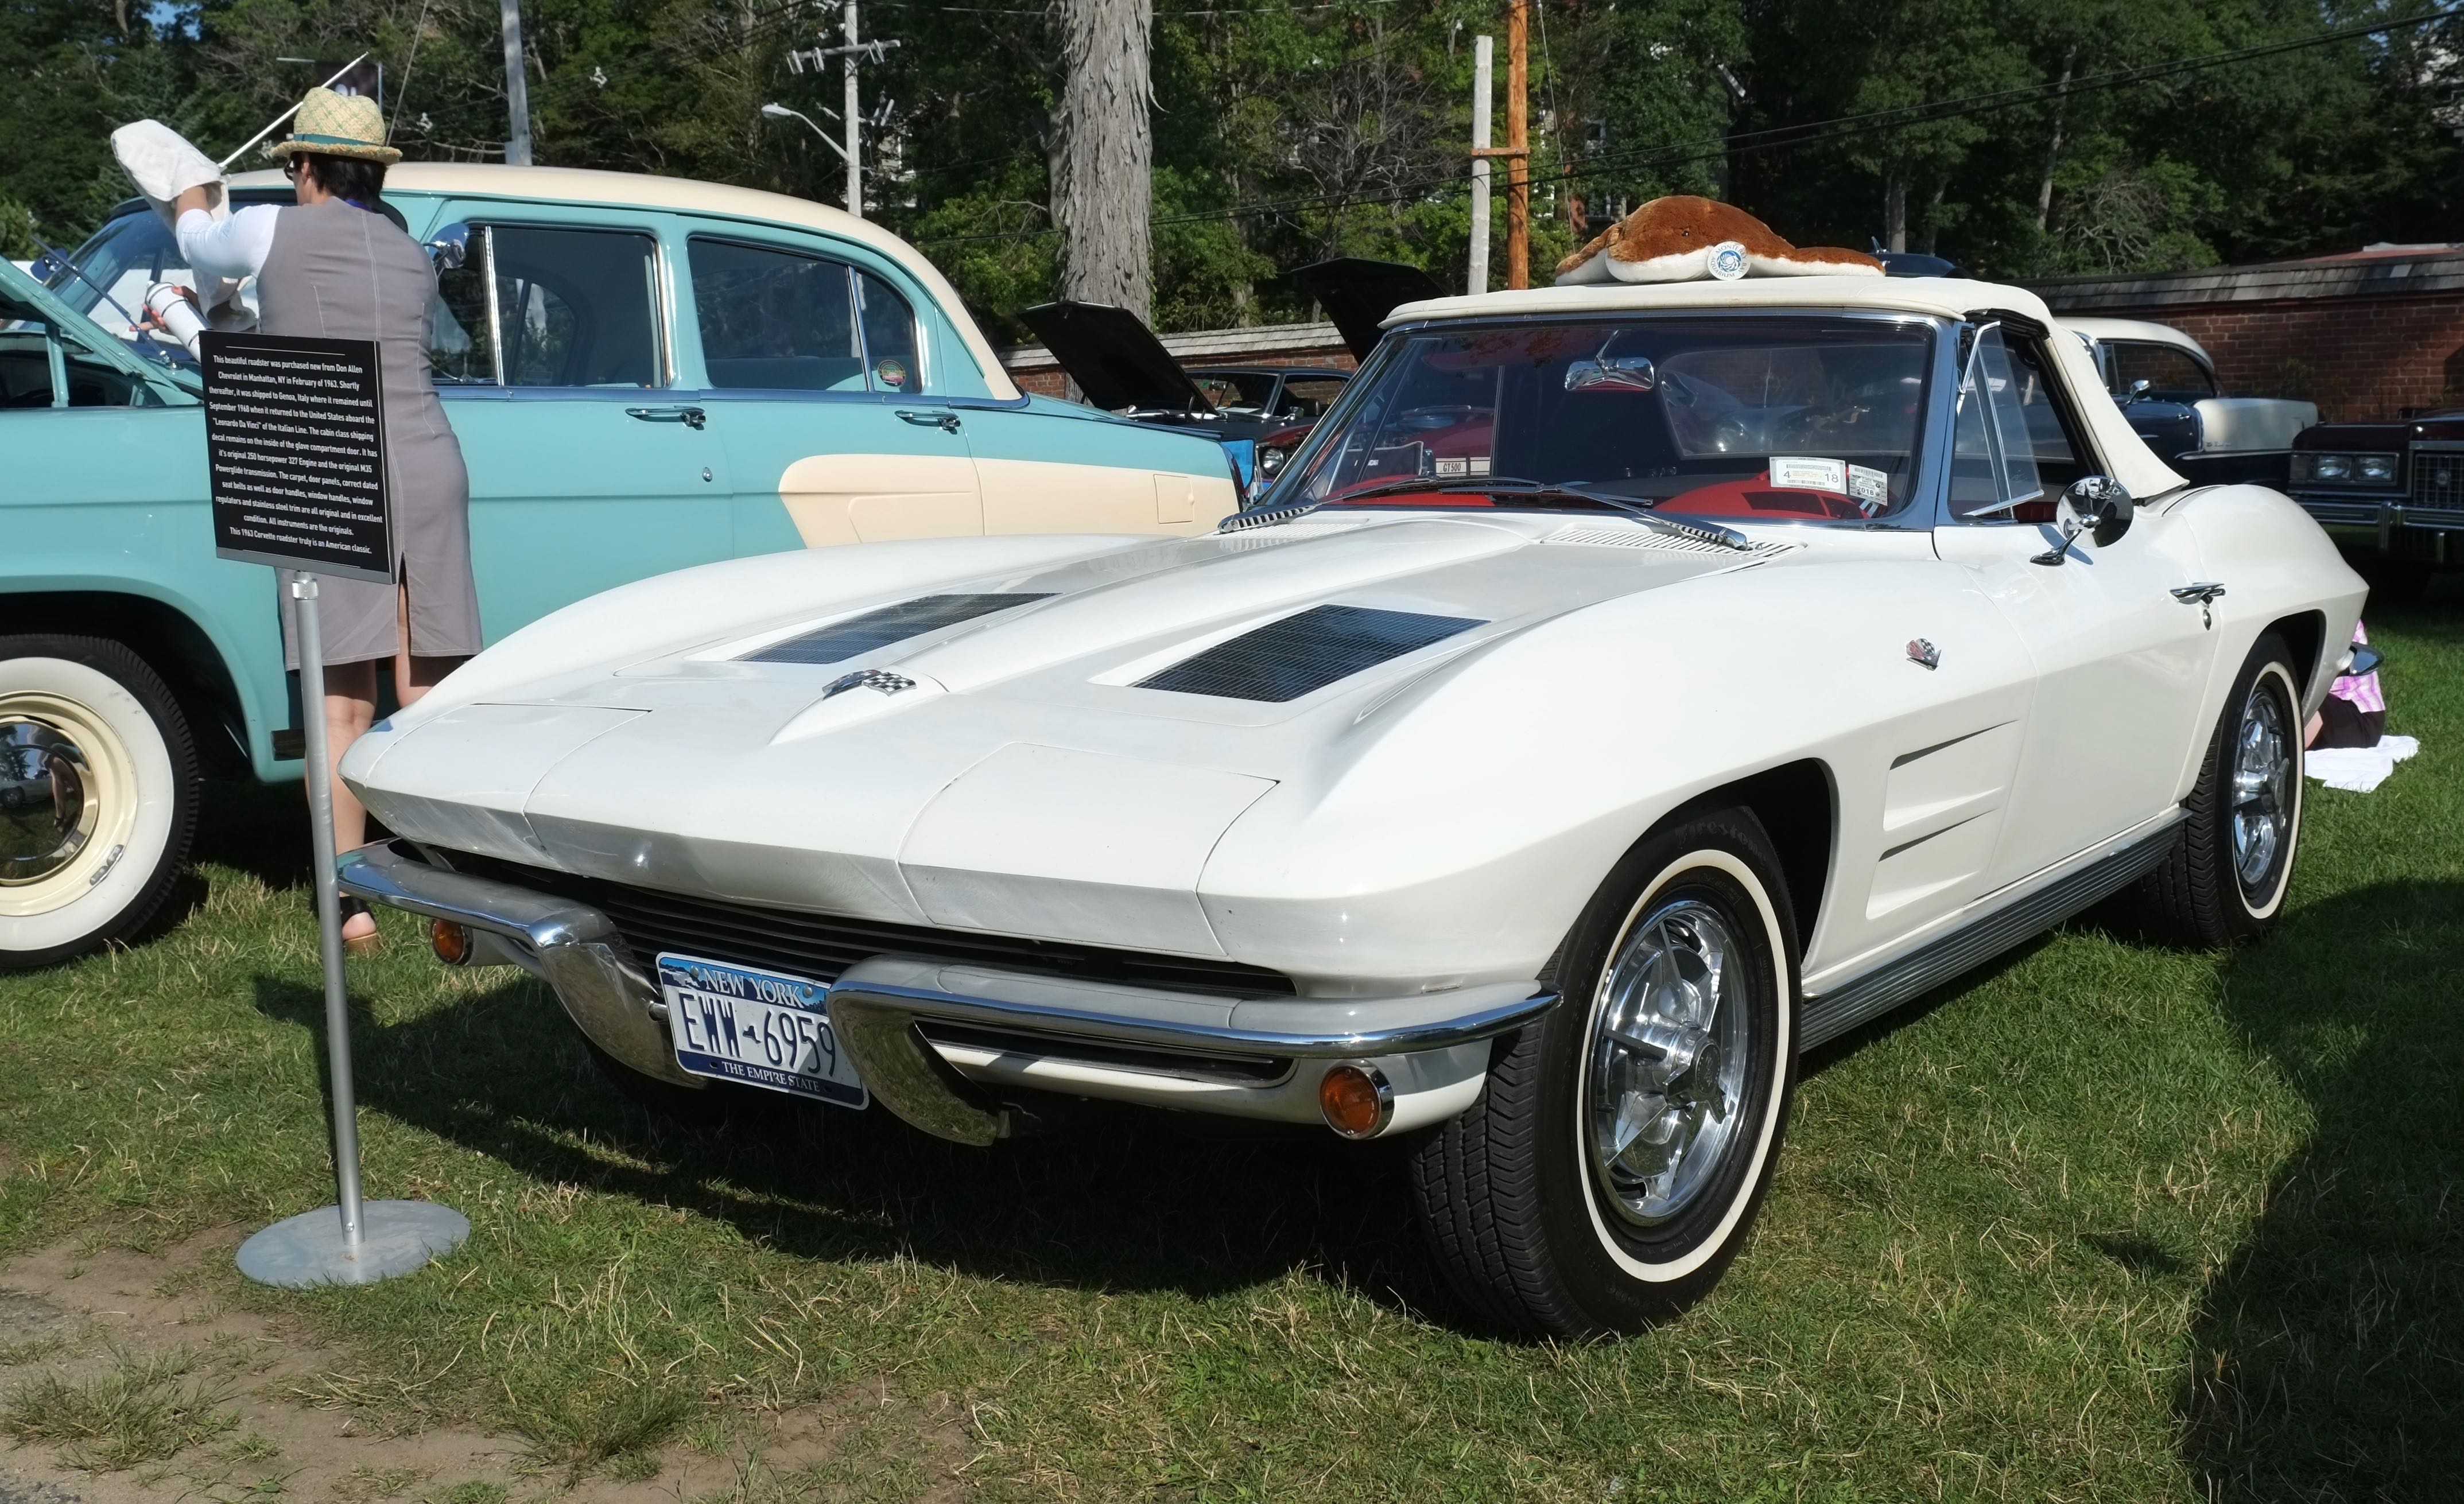 1963 Chevrolet Corvette still looks showroom fresh more than 50 years after production | Andy Reid photos